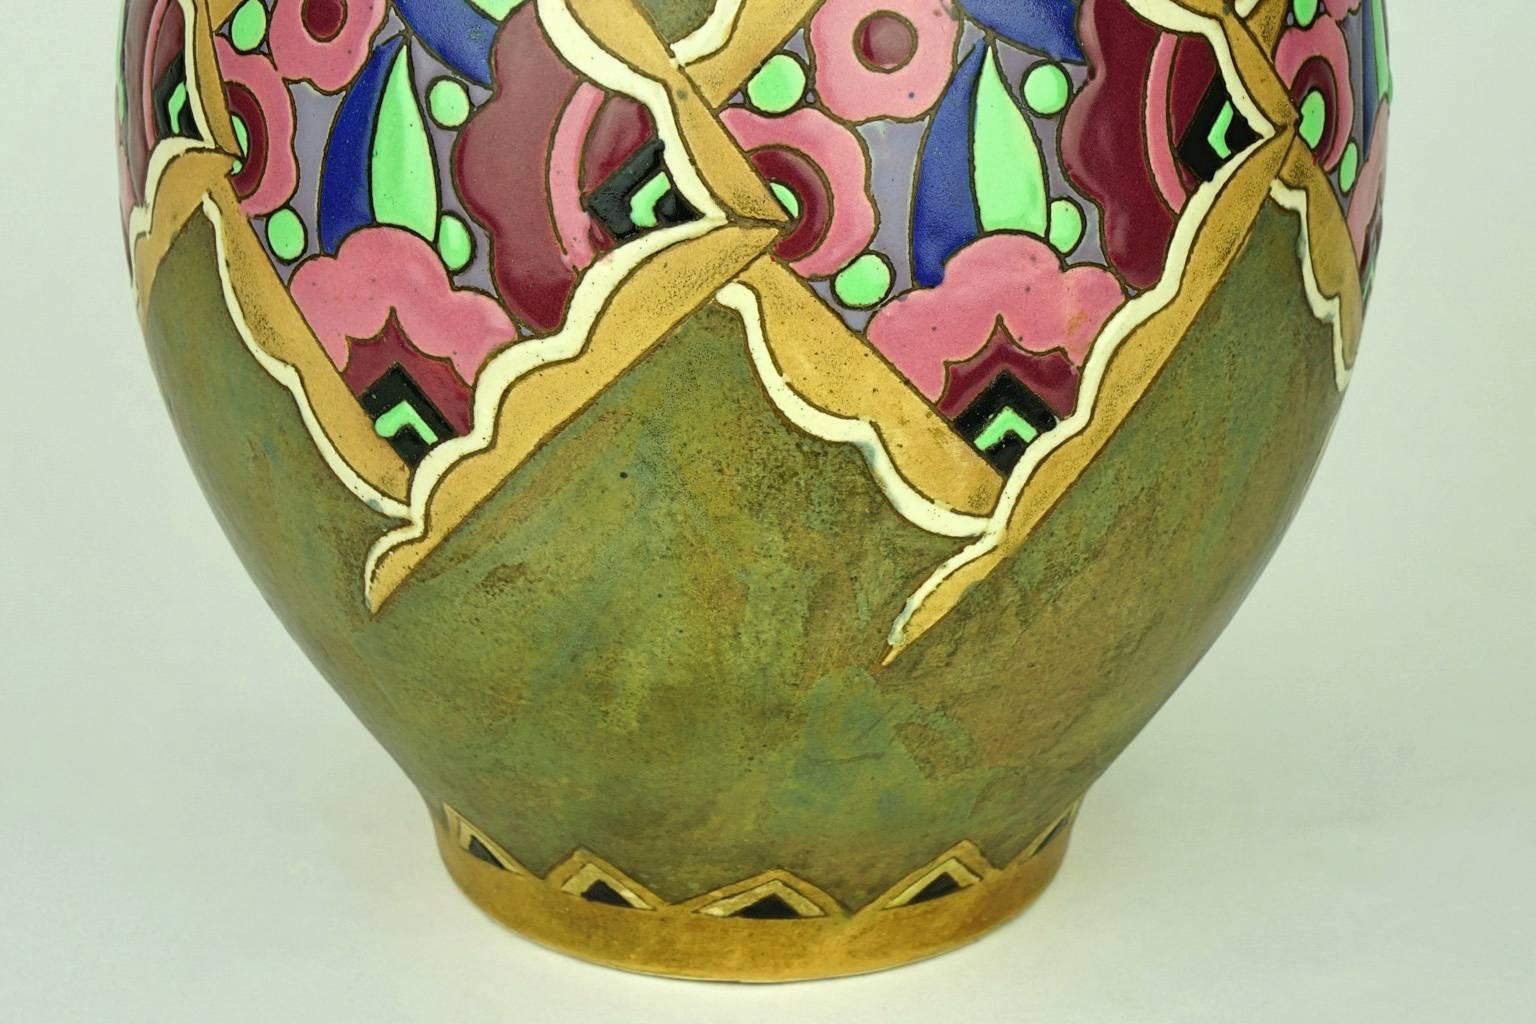 Rare Art deco Keramis vase with the belly decorated with a frieze of colorful stylized flowers in rhombuses on mat green background. (Design 1449).

Marks: F 963.

Material: Enameled stoneware.